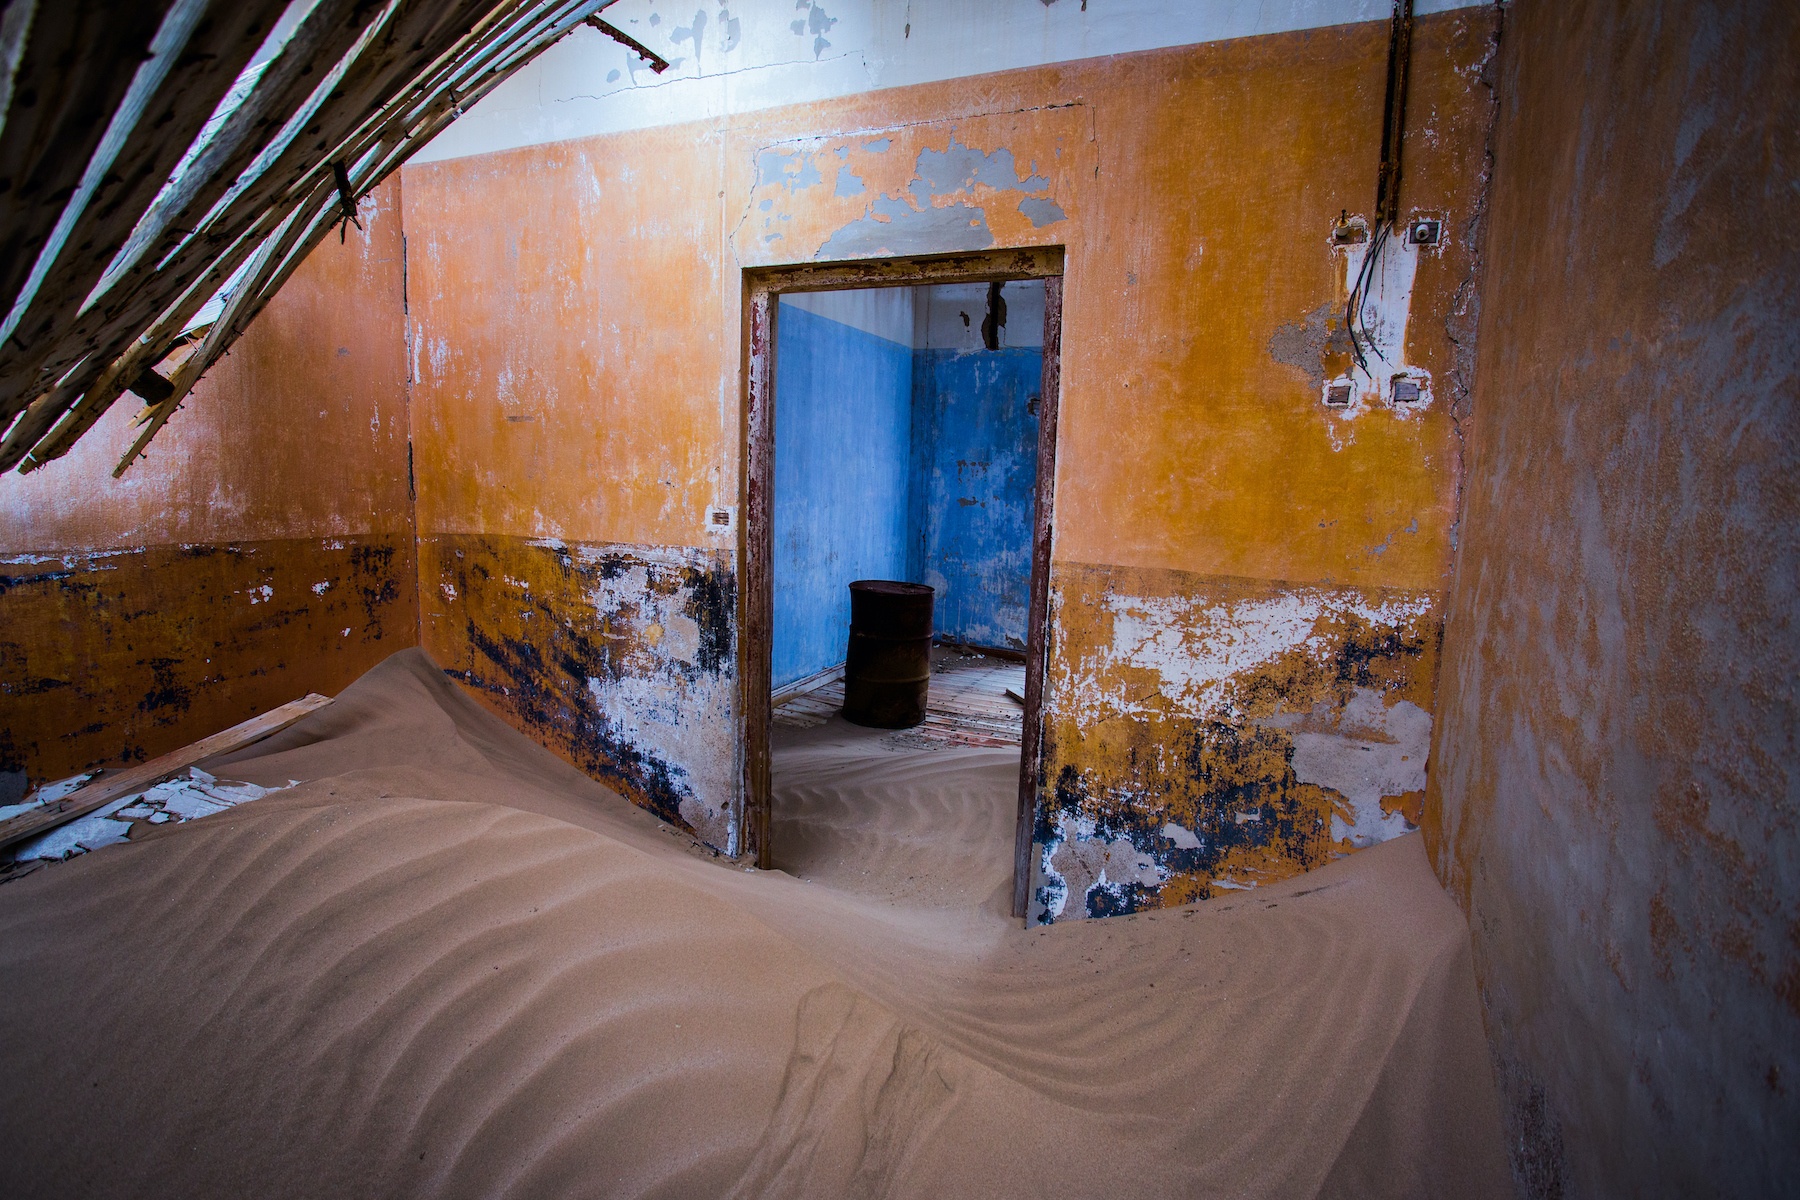 Dunes invade a room inside the ruined mining town of Kolmanskop in Namibia